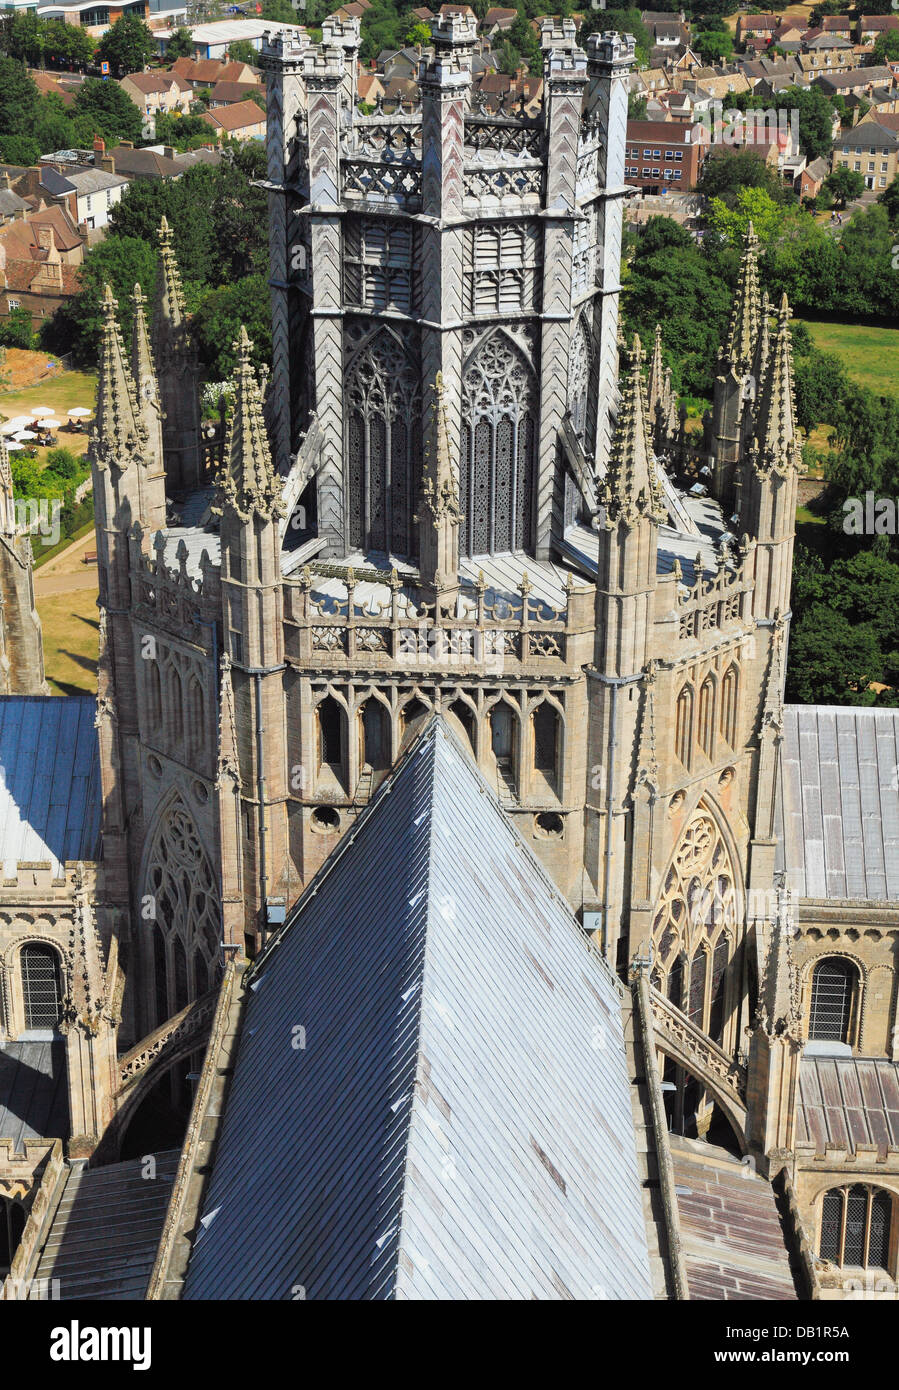 Ely Cathedral, Octagon and Lantern Towers from West Tower, Cambridgeshire England UK English medieval cathedrals tower Stock Photo